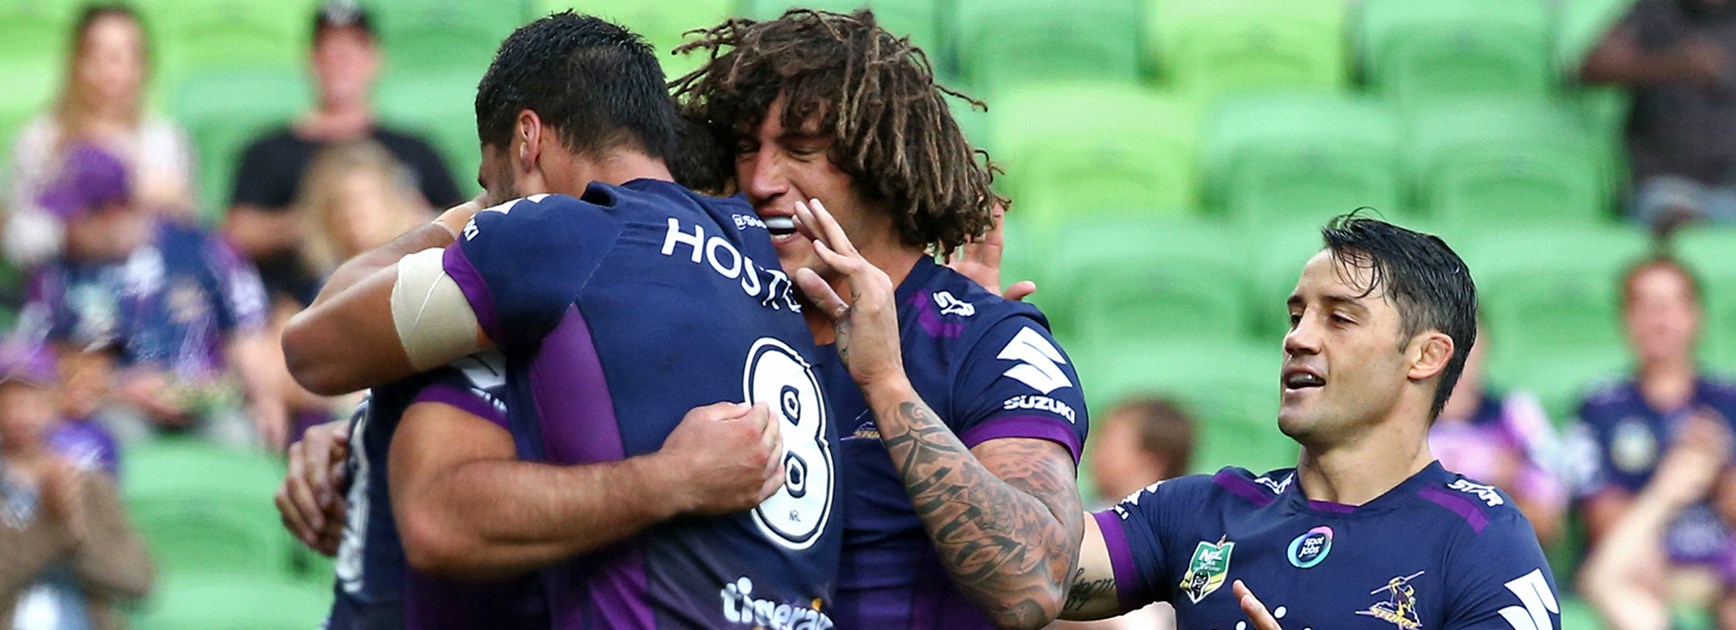 Melbourne Storm celebrate a try against the Titans at AAMI Park in Round 2.